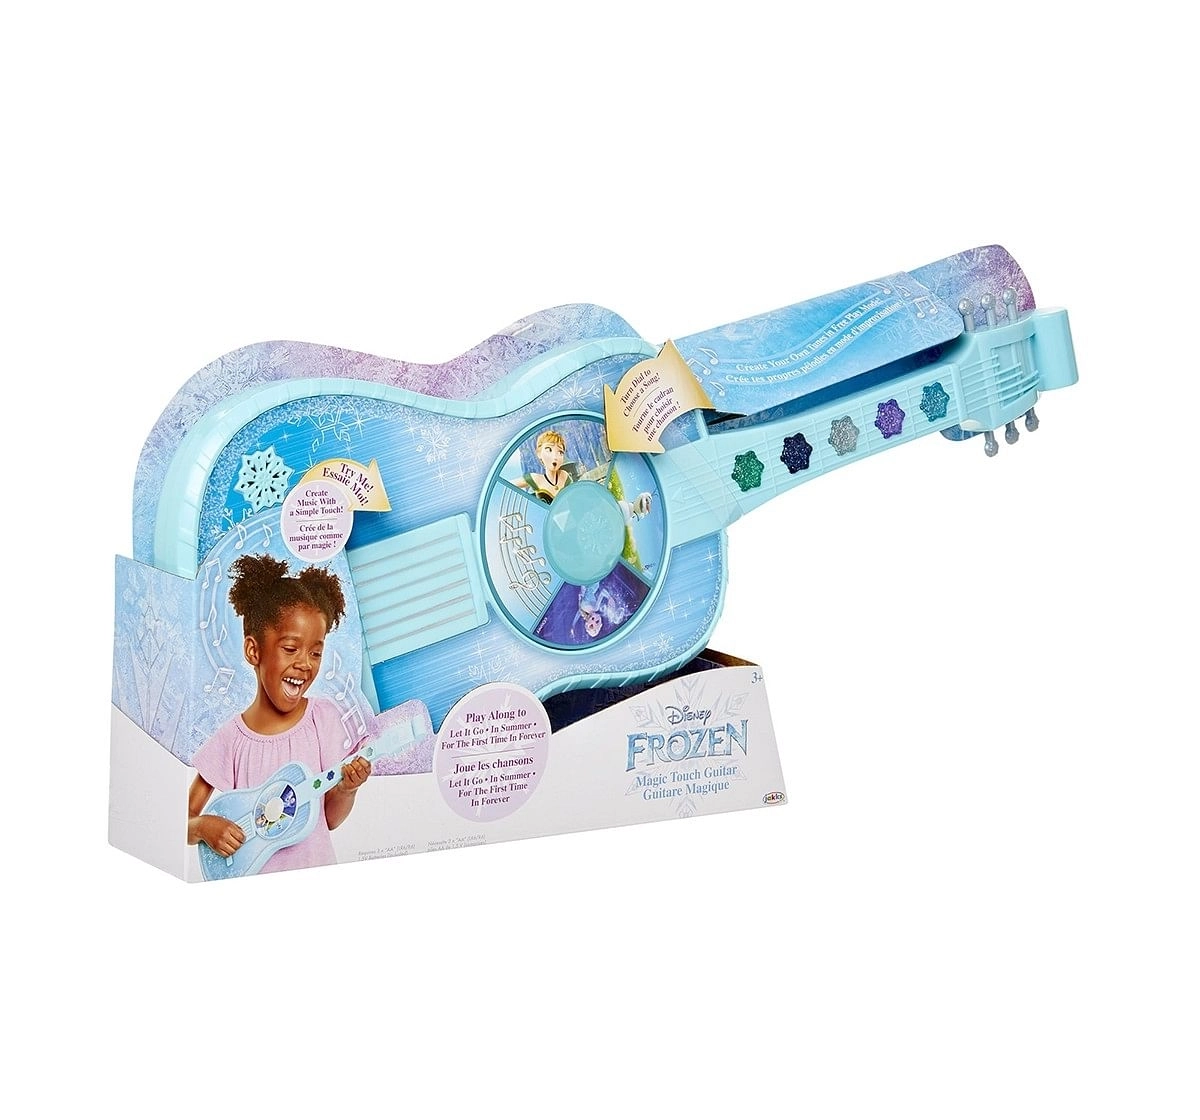 Disney Frozen Magic Touch Guitar Roleplay sets for Kids age 3Y+ 